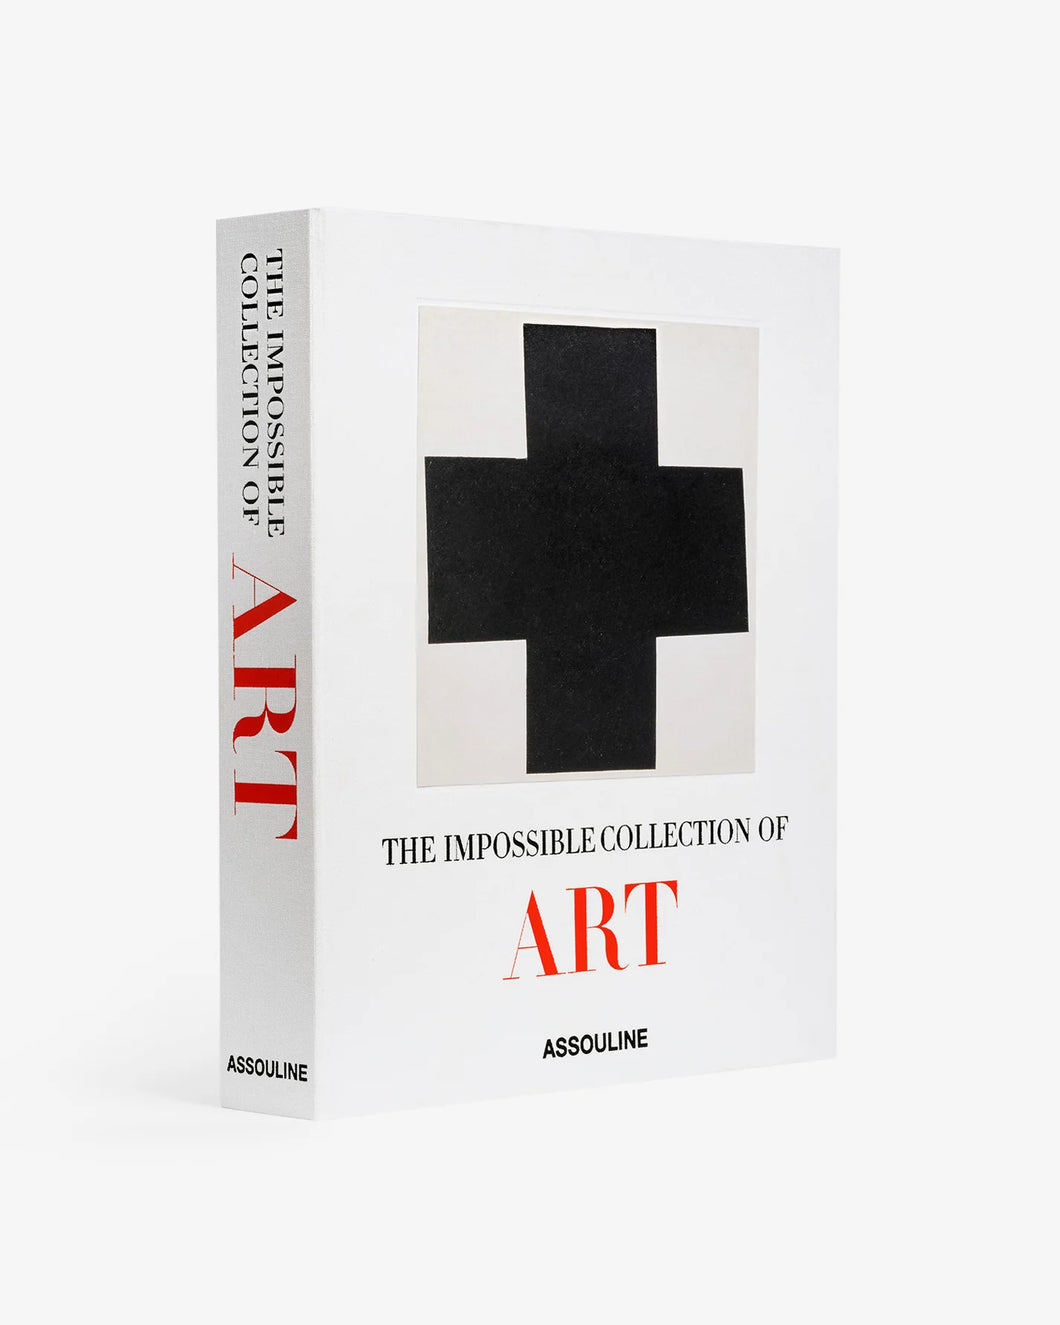 The imposible Collection of Art